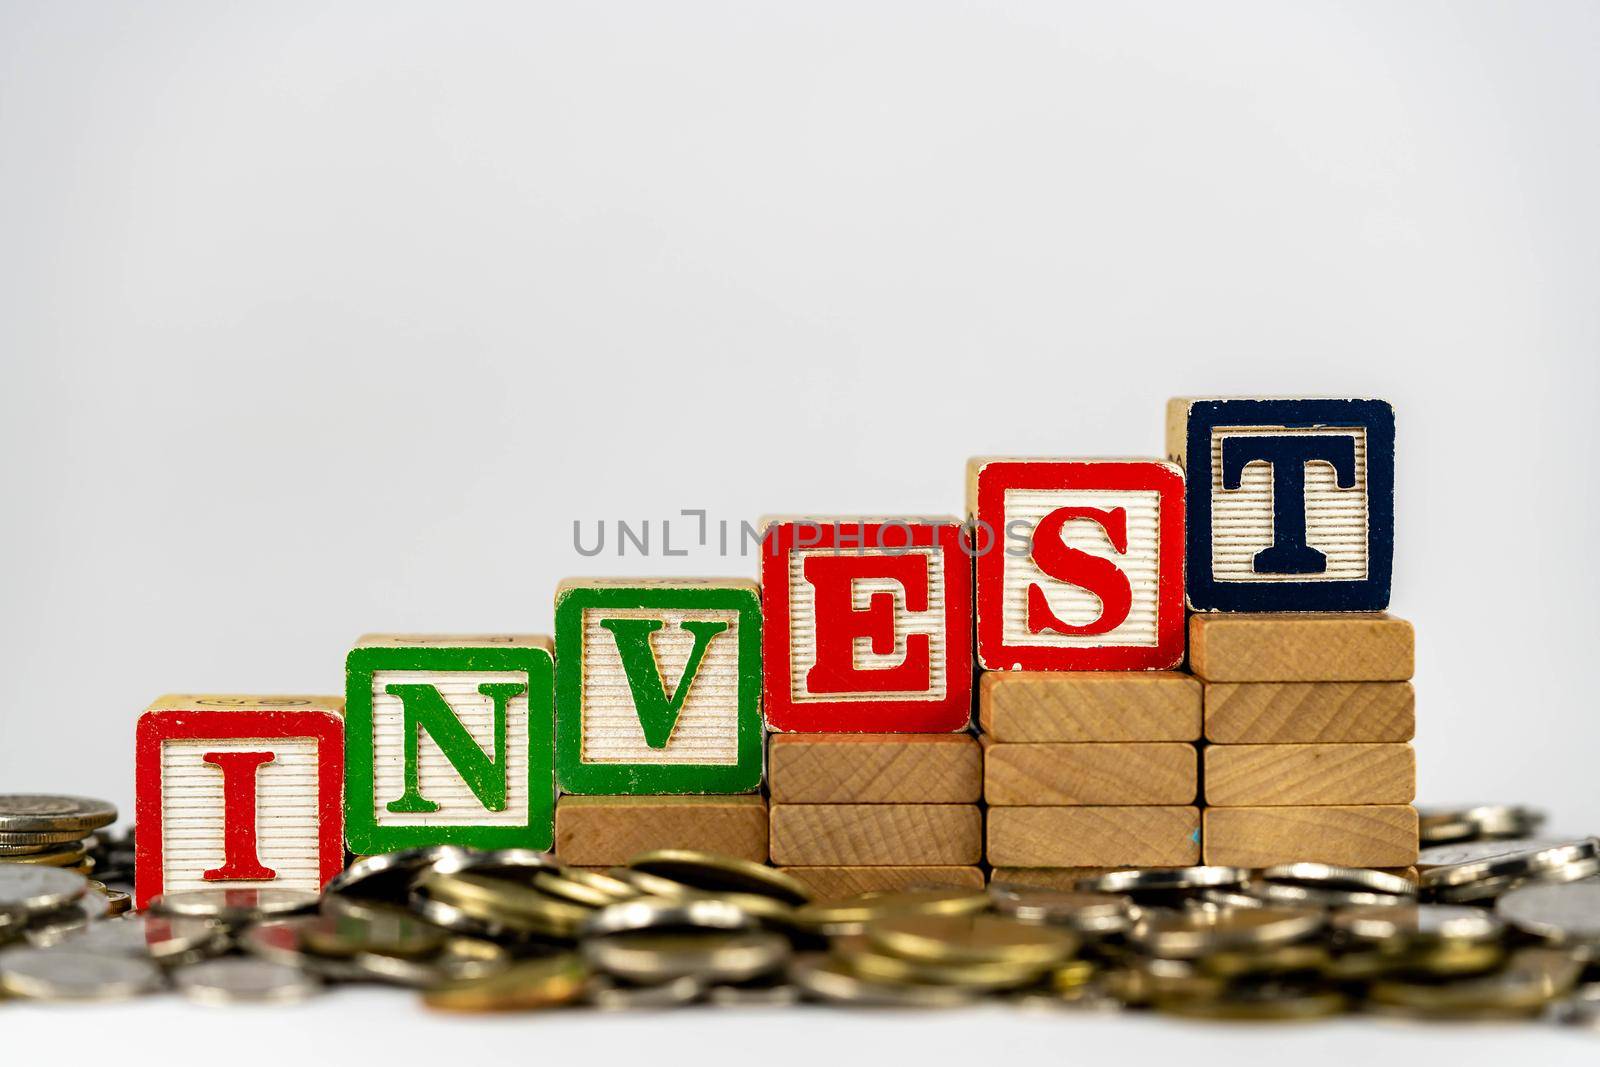 Investment concept with wooden blocks and coins. Invest letters on wooden blocks sorrounded with money